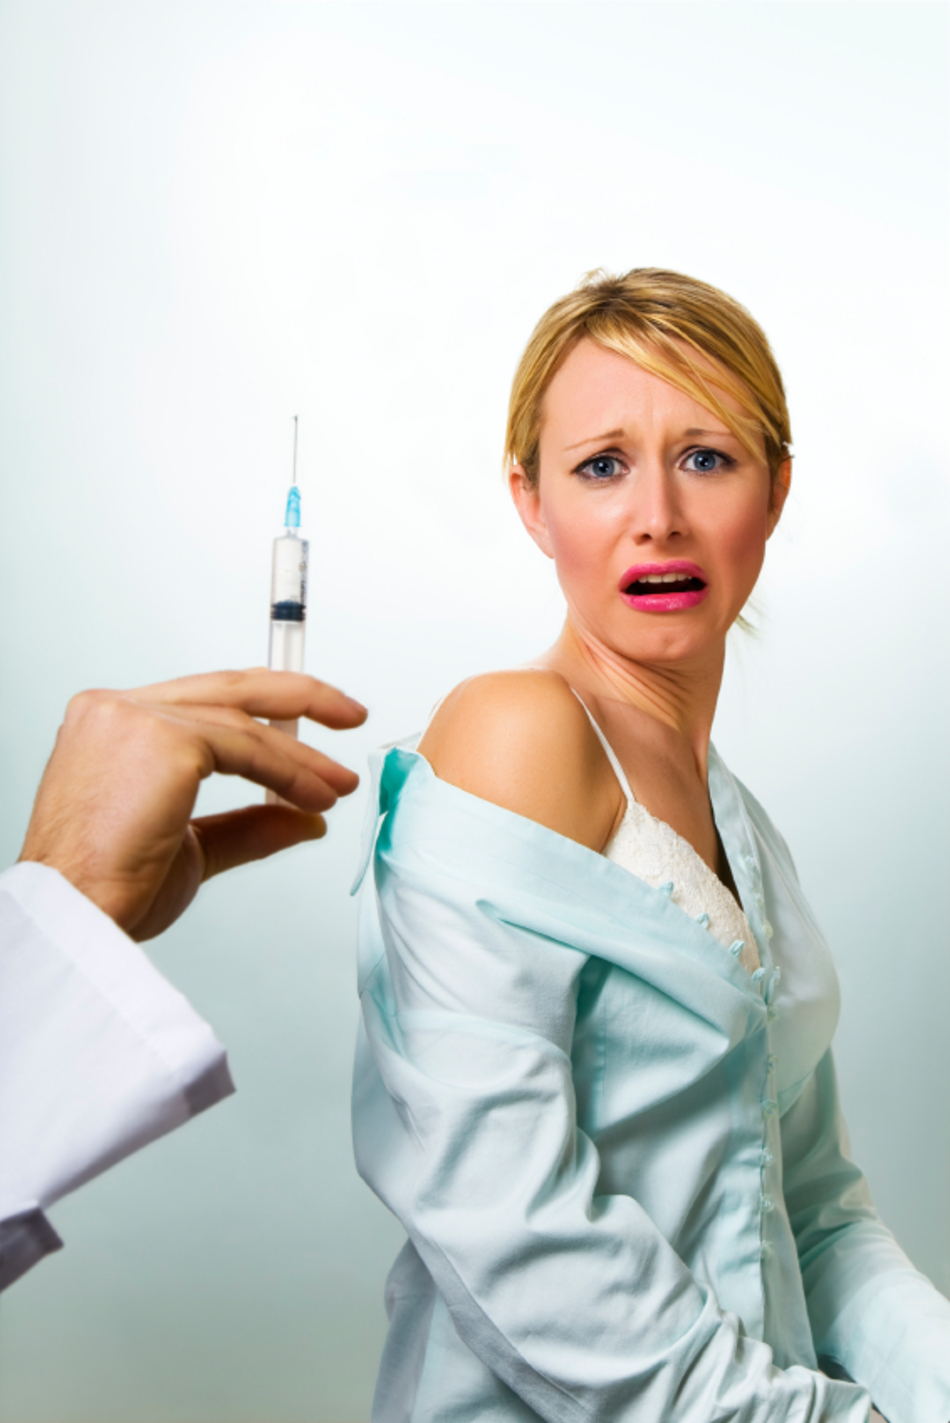 Why are People so Freaked Out by Flu Shots?